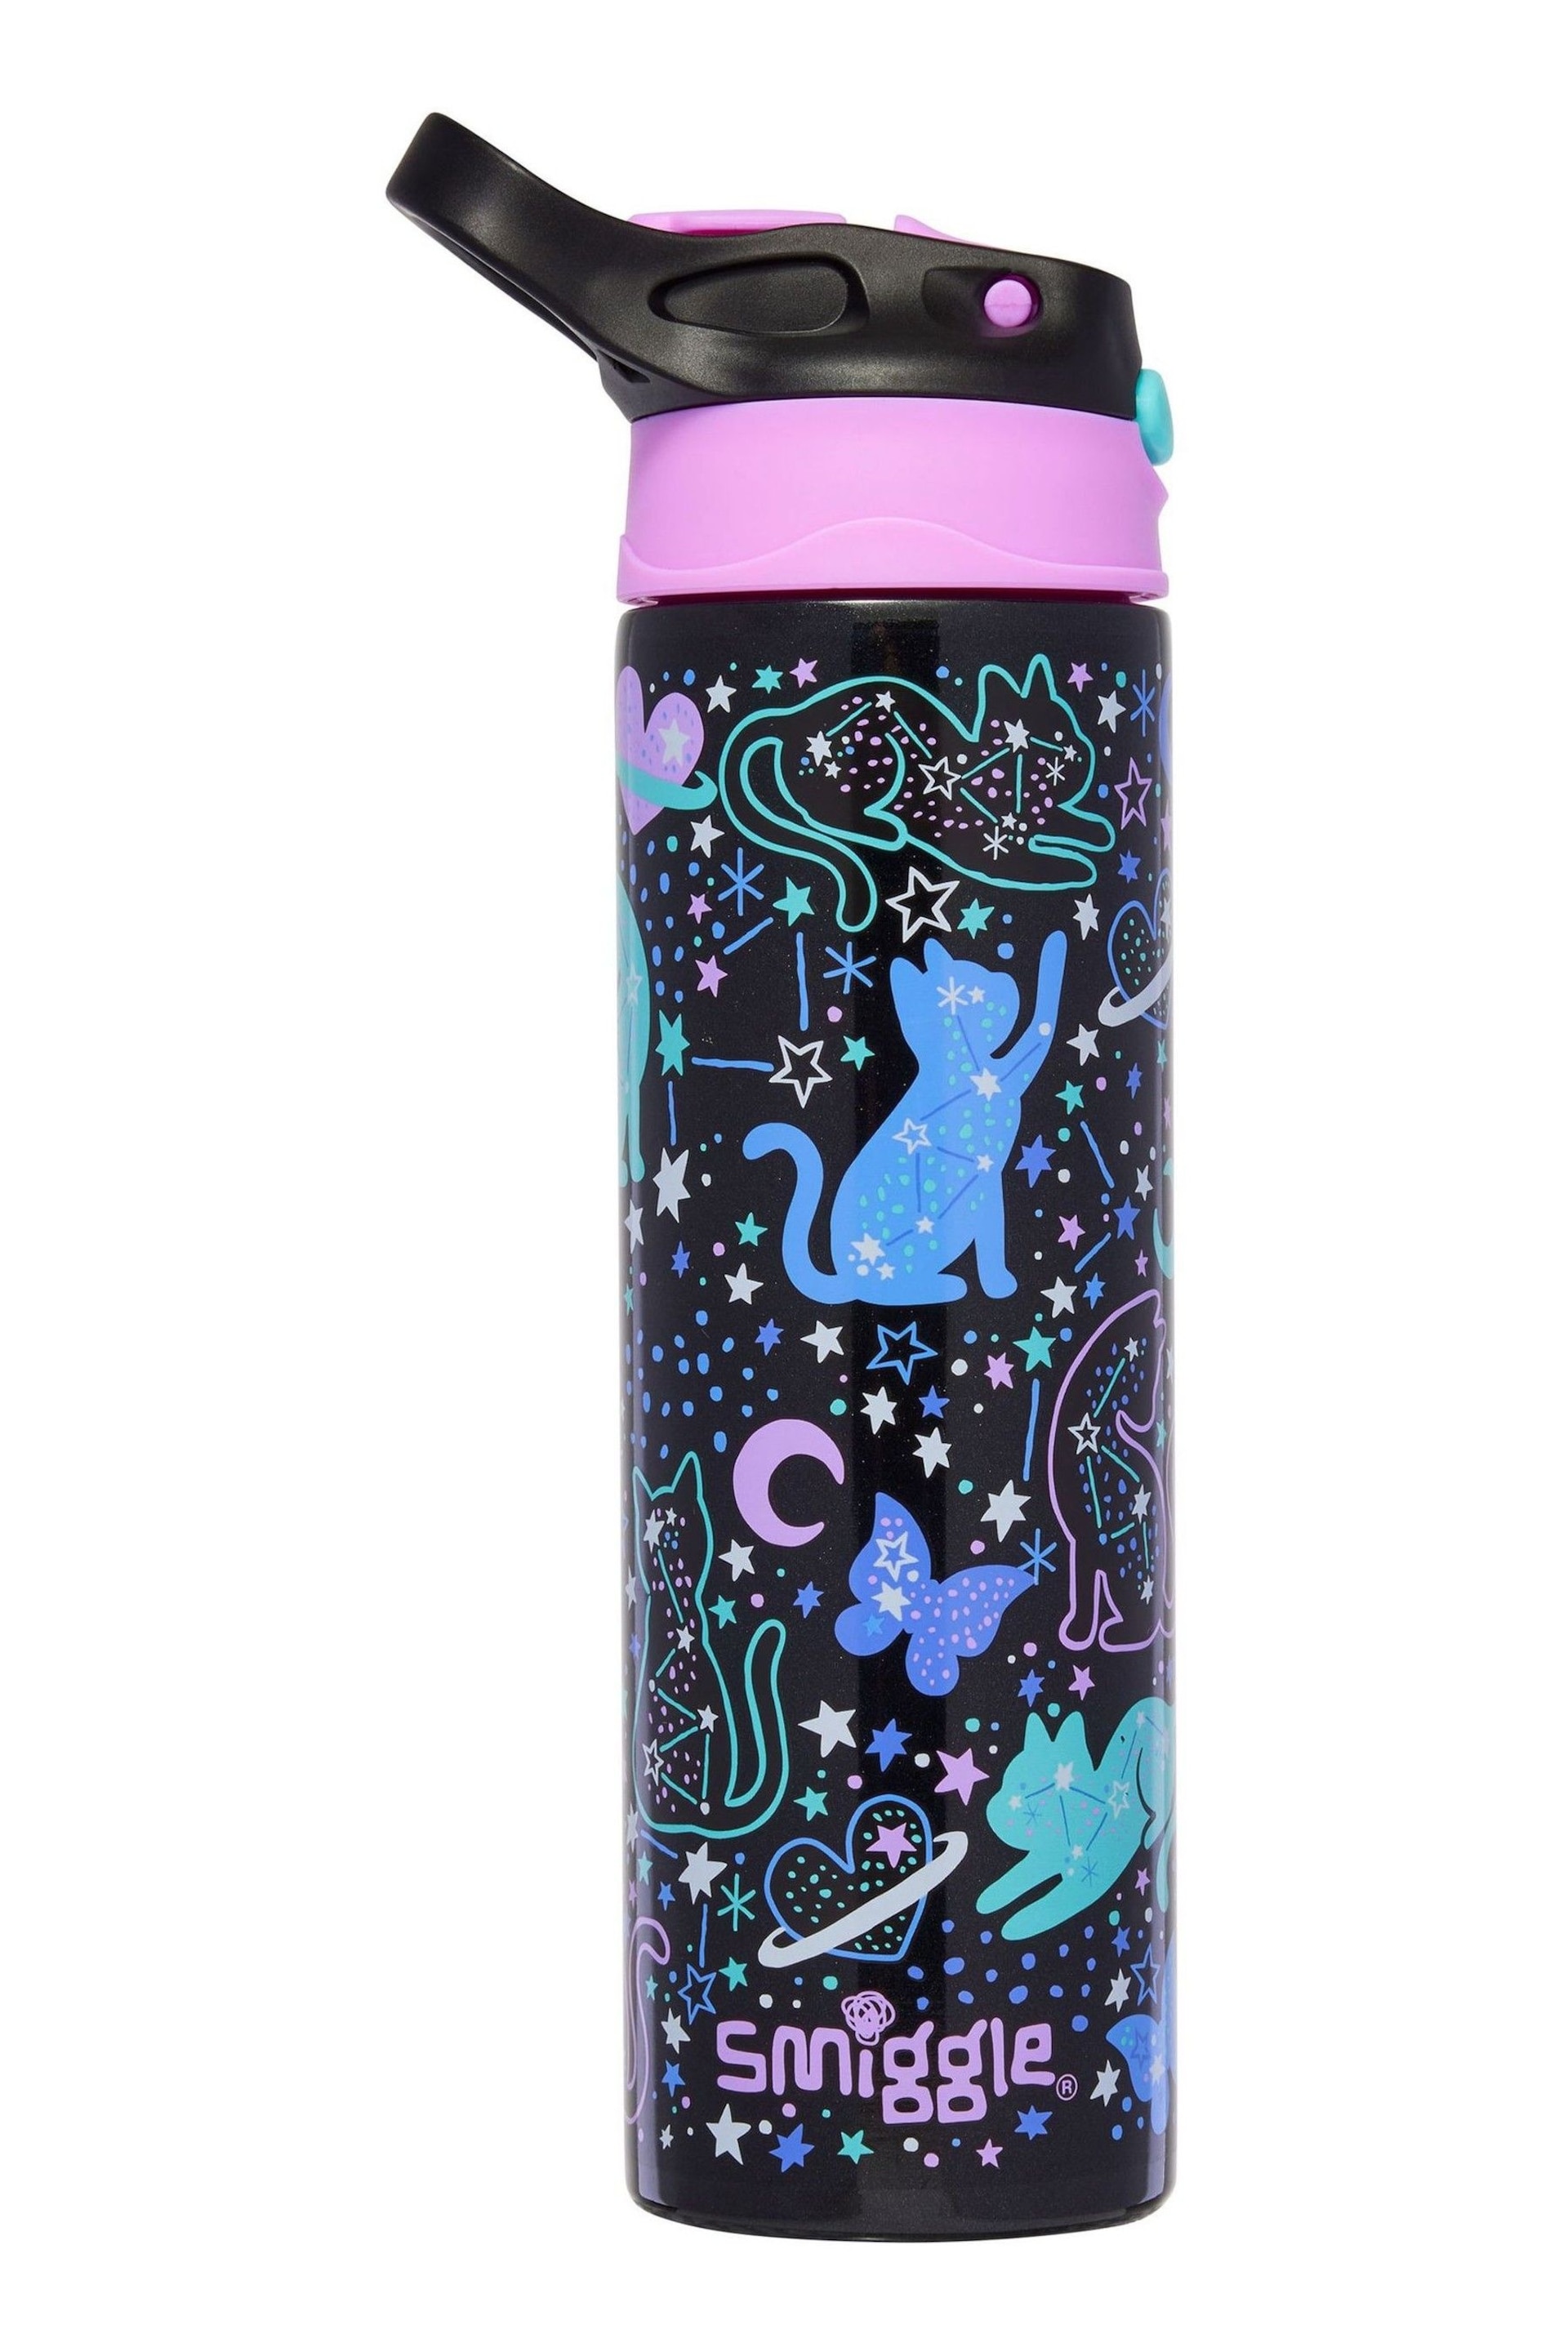 Smiggle Purple Wild Side Insulated Stainless Steel Flip Drink Bottle 520Ml - Image 3 of 3